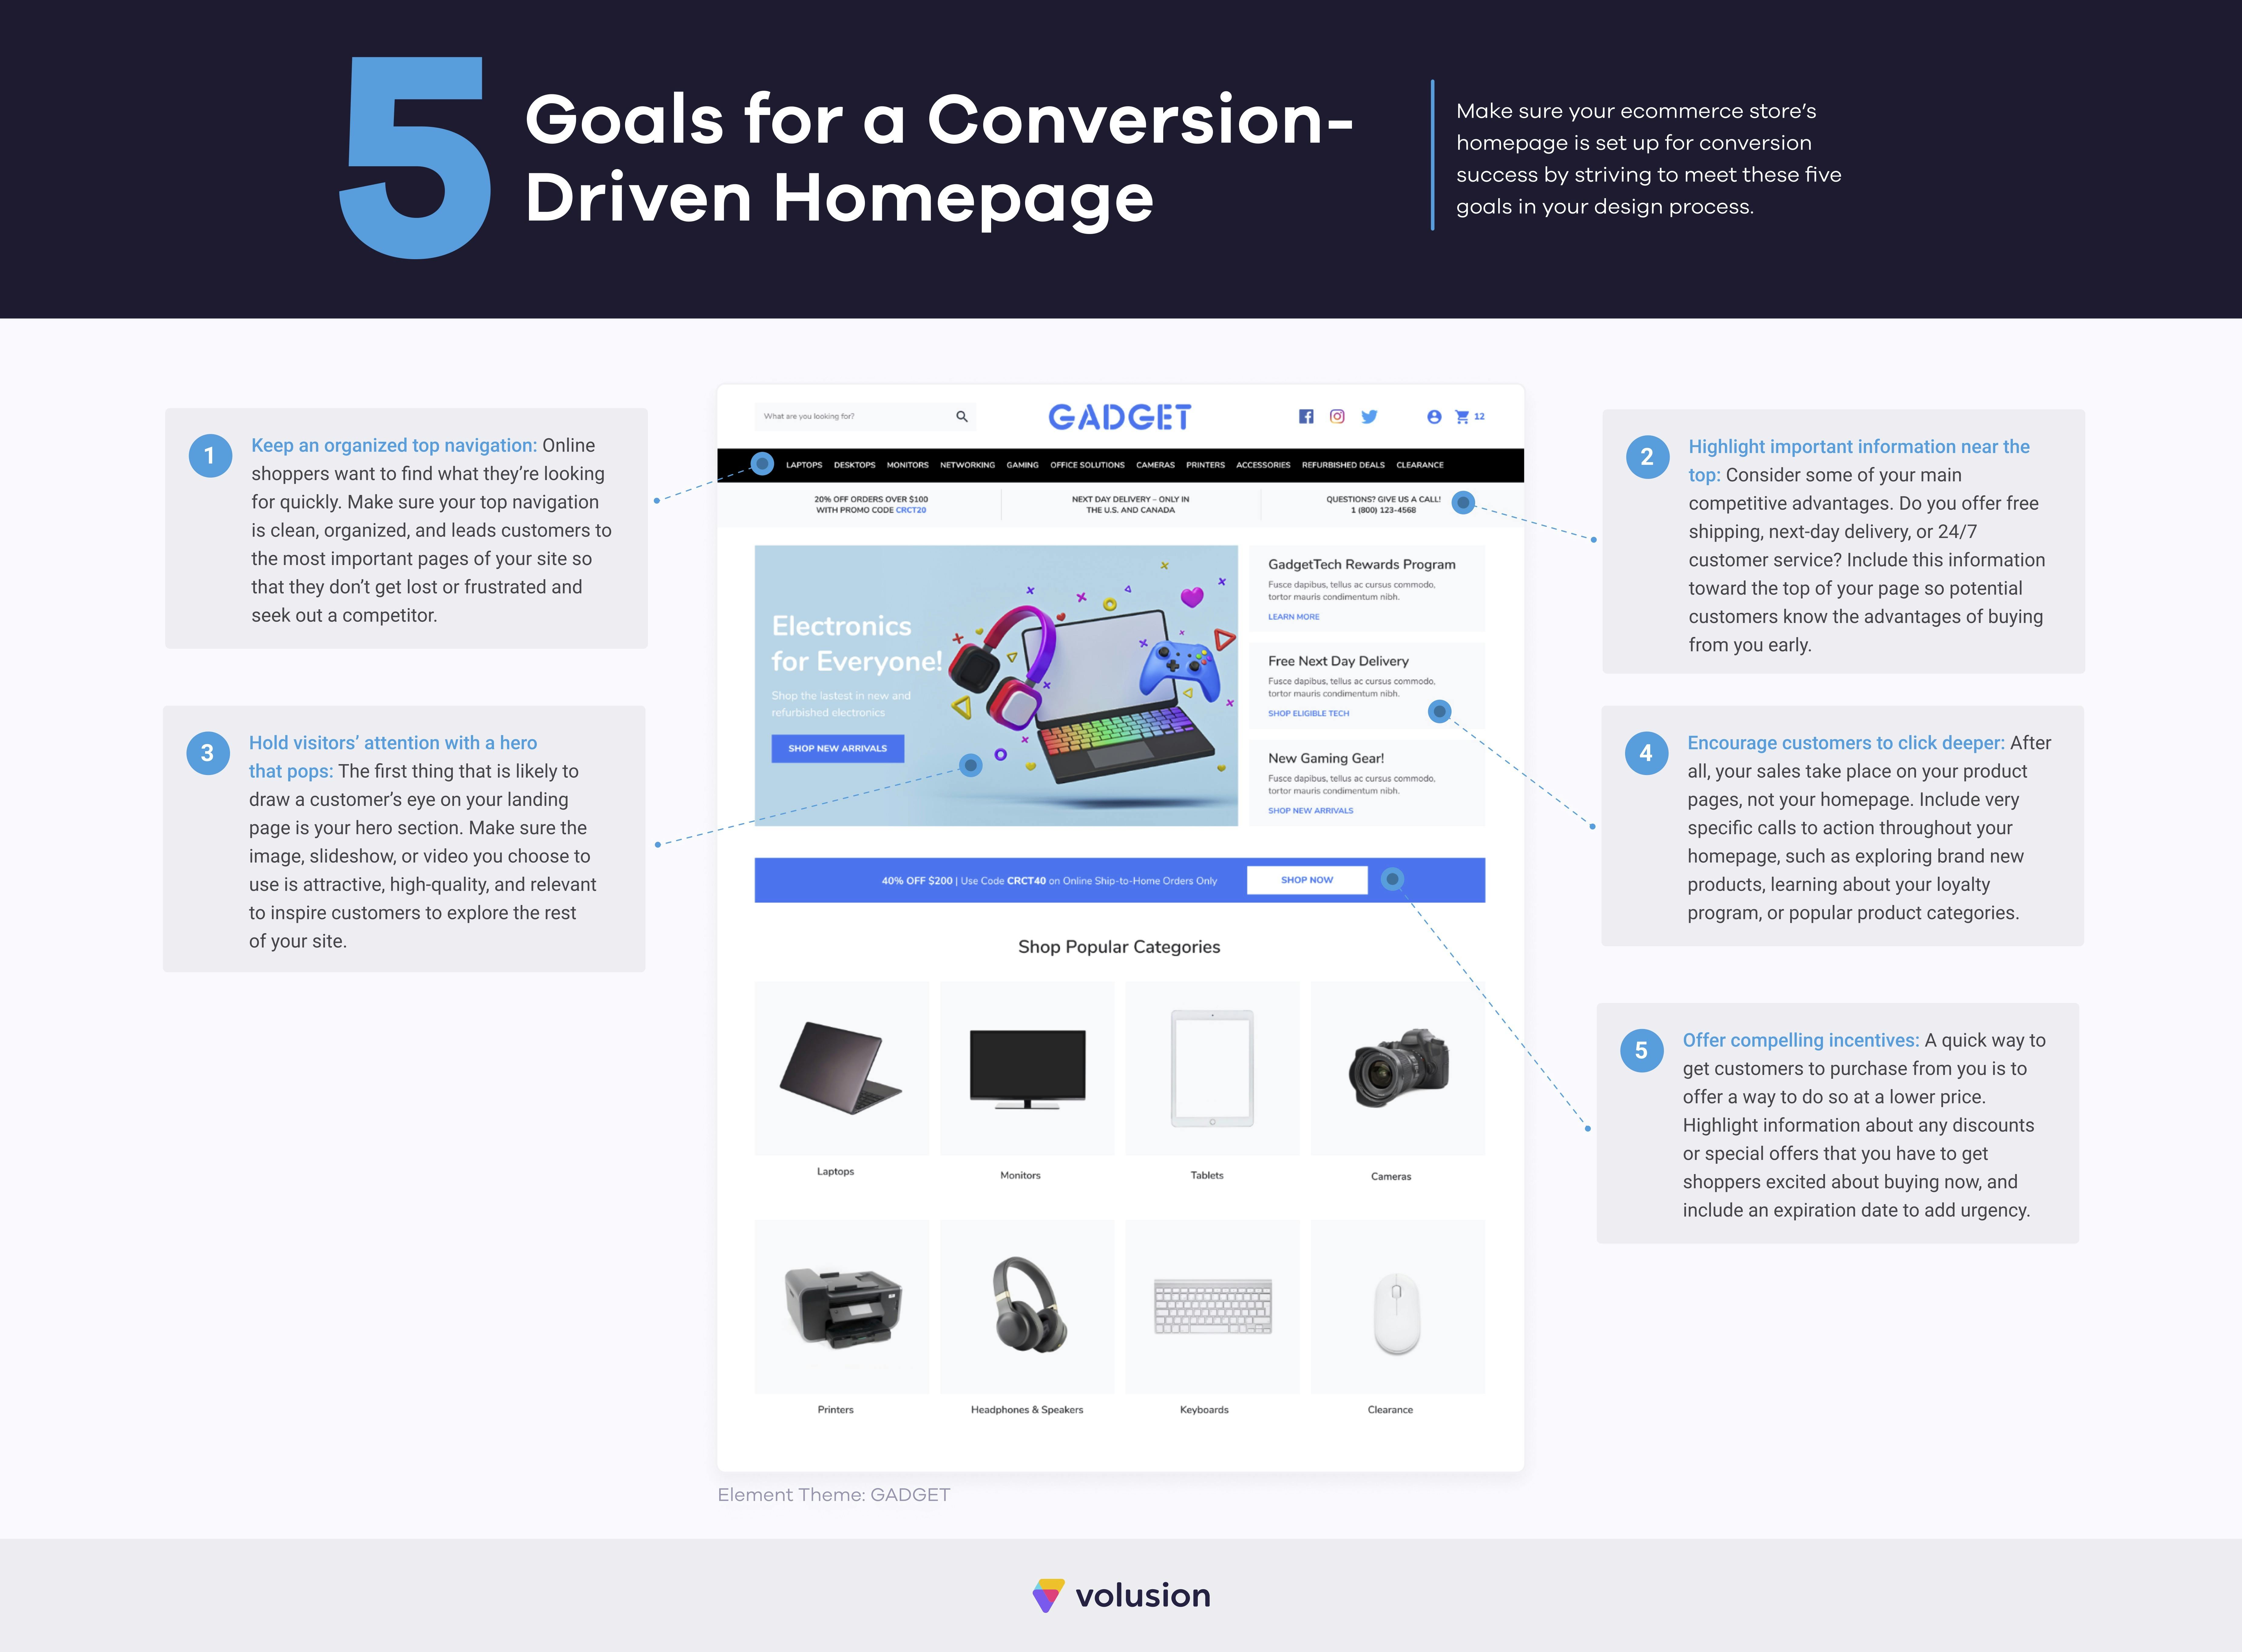 5 Goals for a Conversion-Driven Homepage